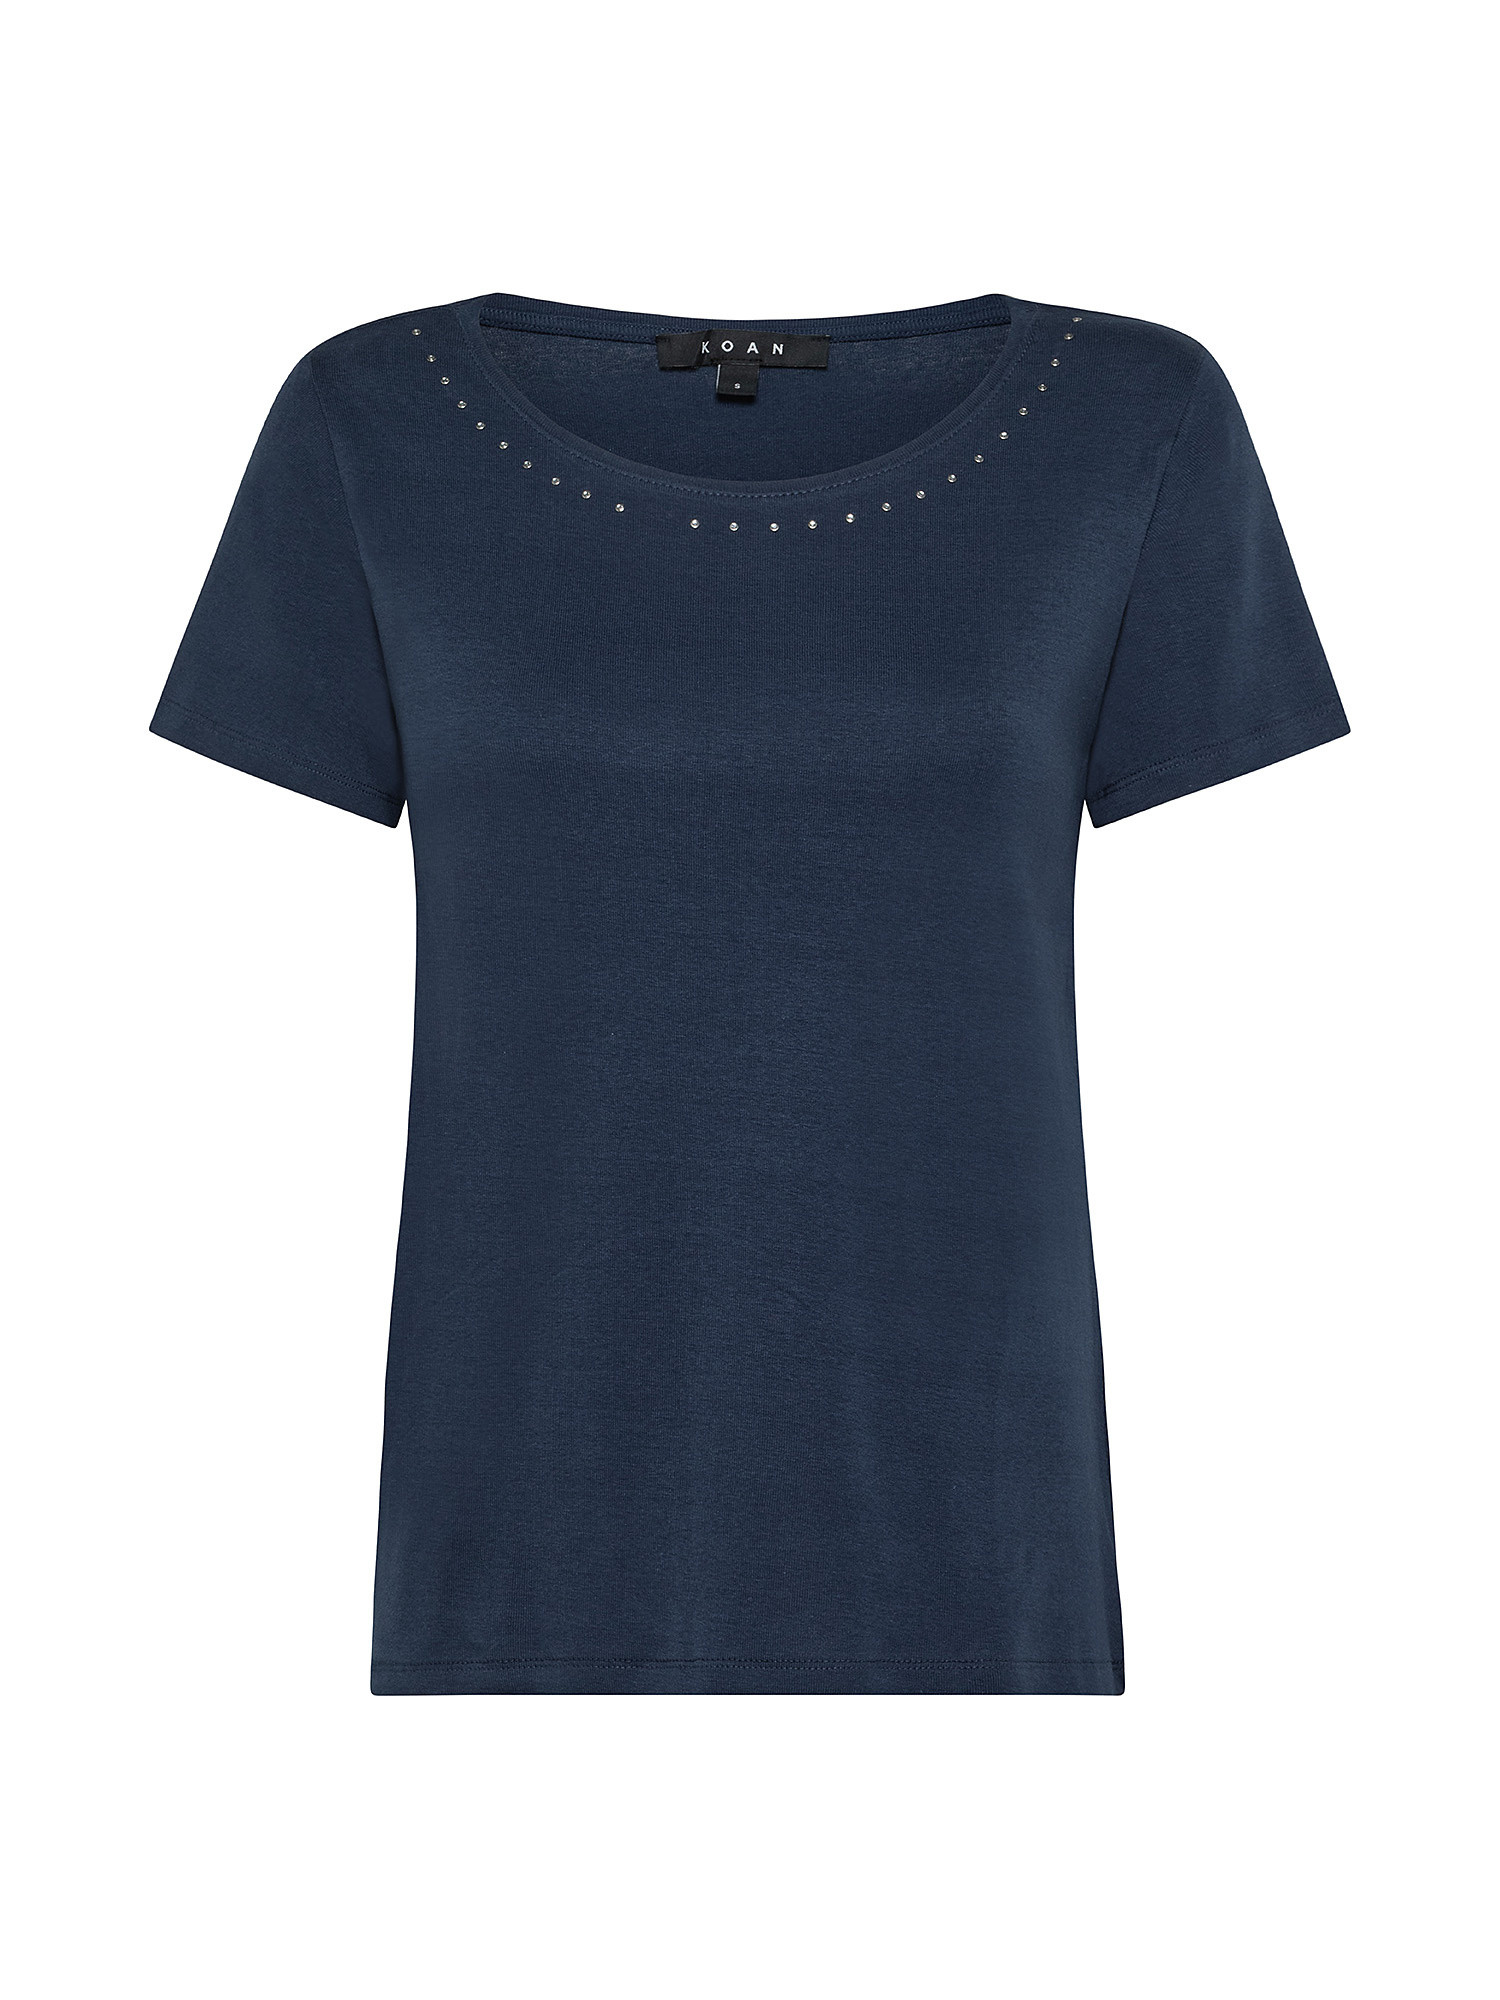 T-shirt con strass, Blu, large image number 0